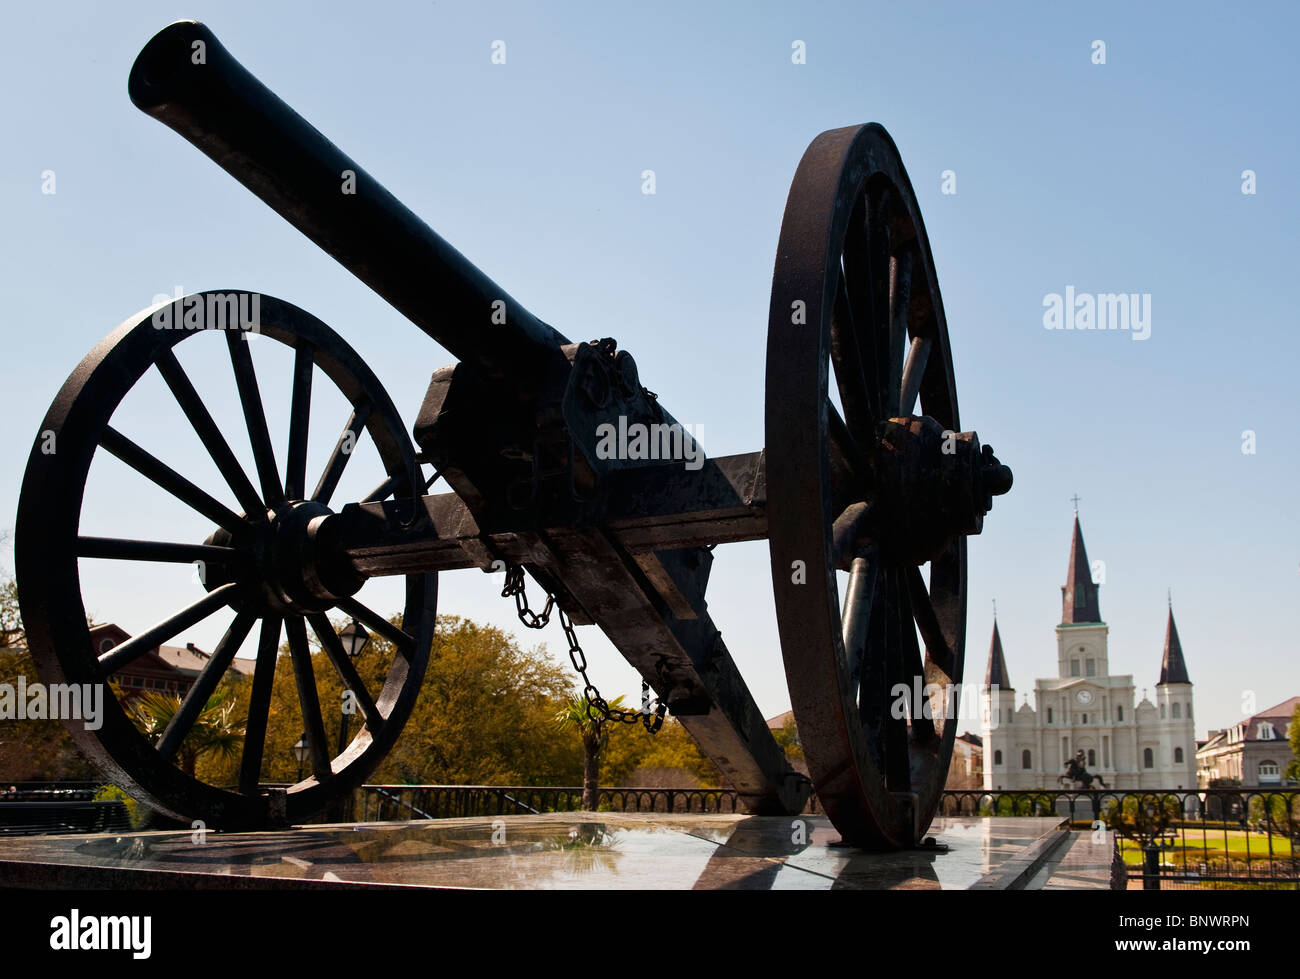 Kanone am Jackson Square in New Orleans Stockfoto